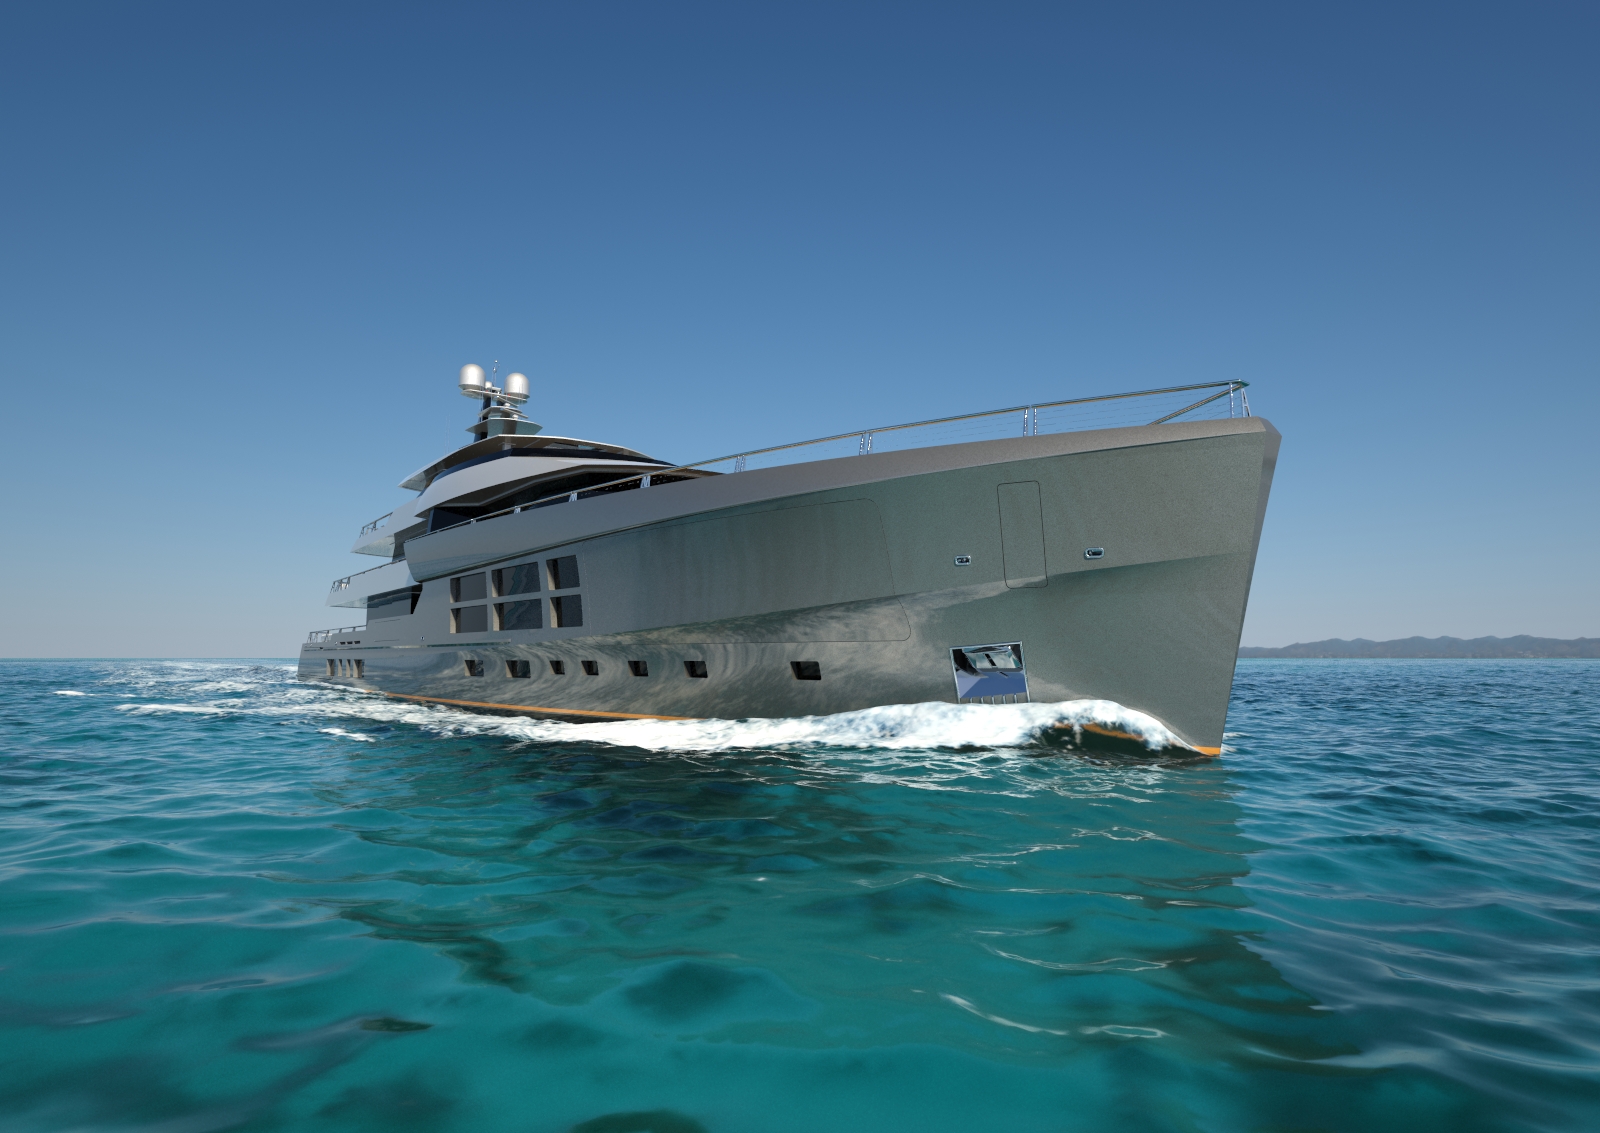 Project Metaverse Cloud Yachts